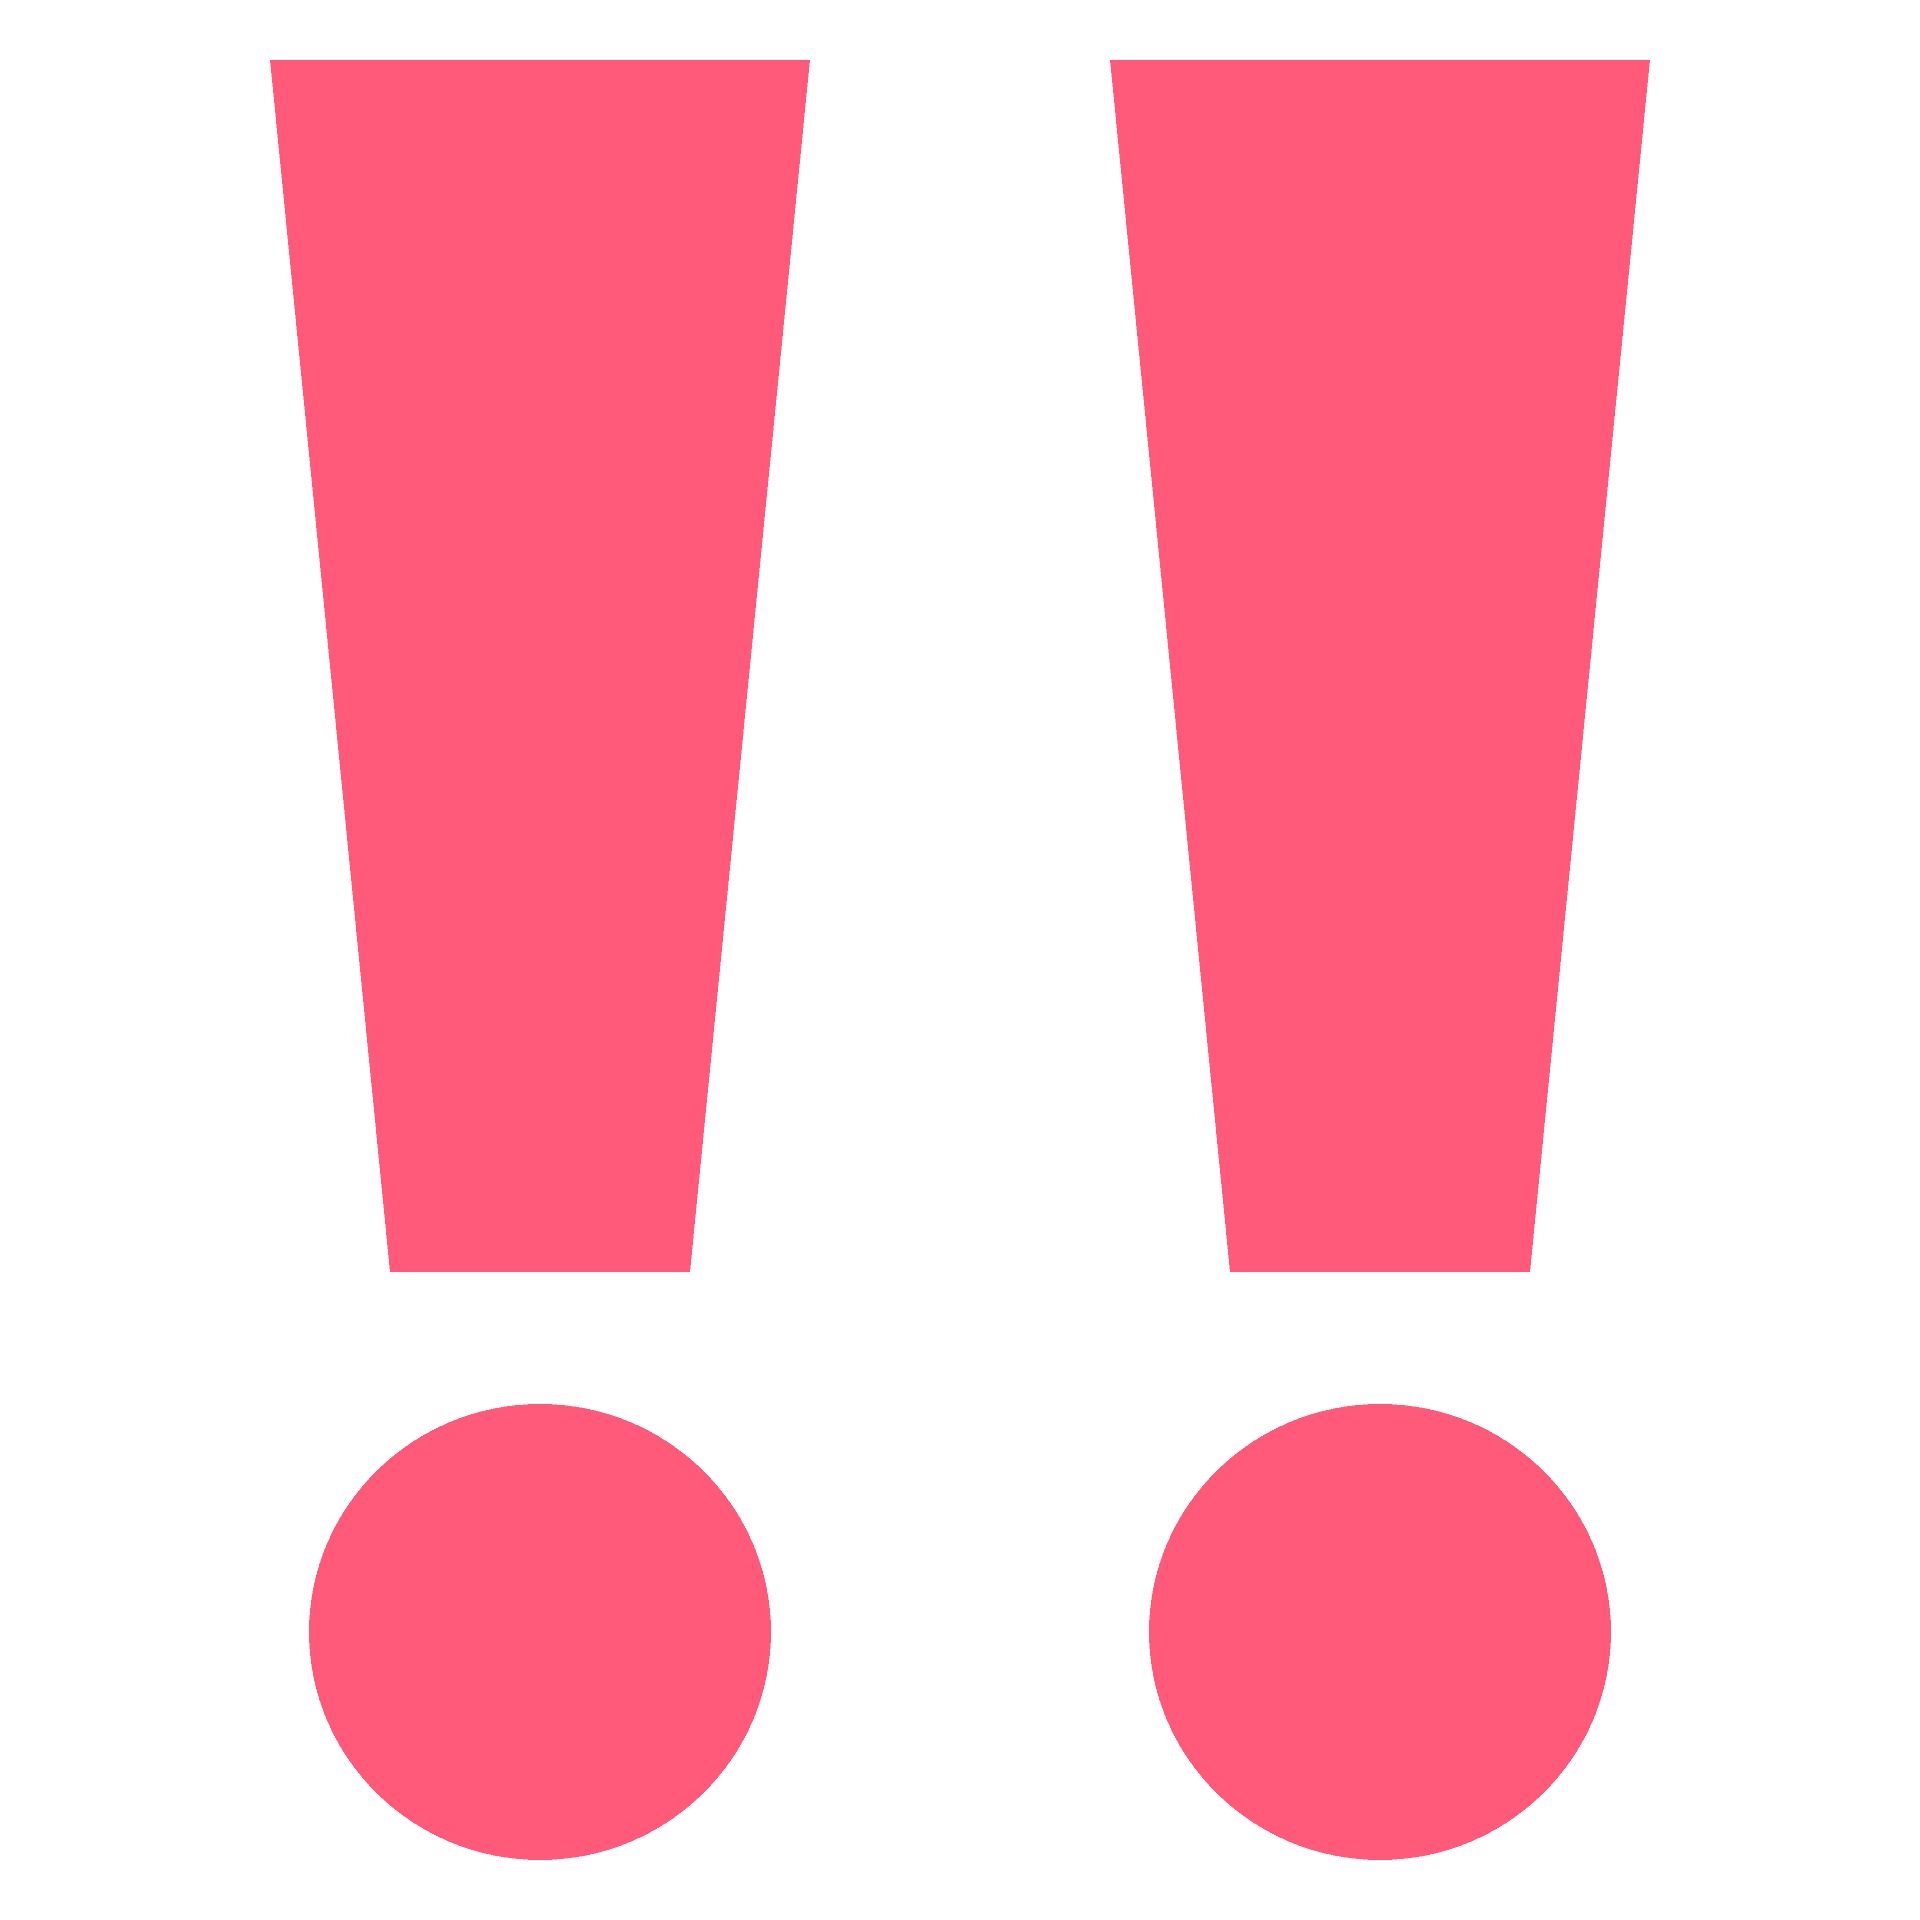 Exclamation Point PNG Images HD